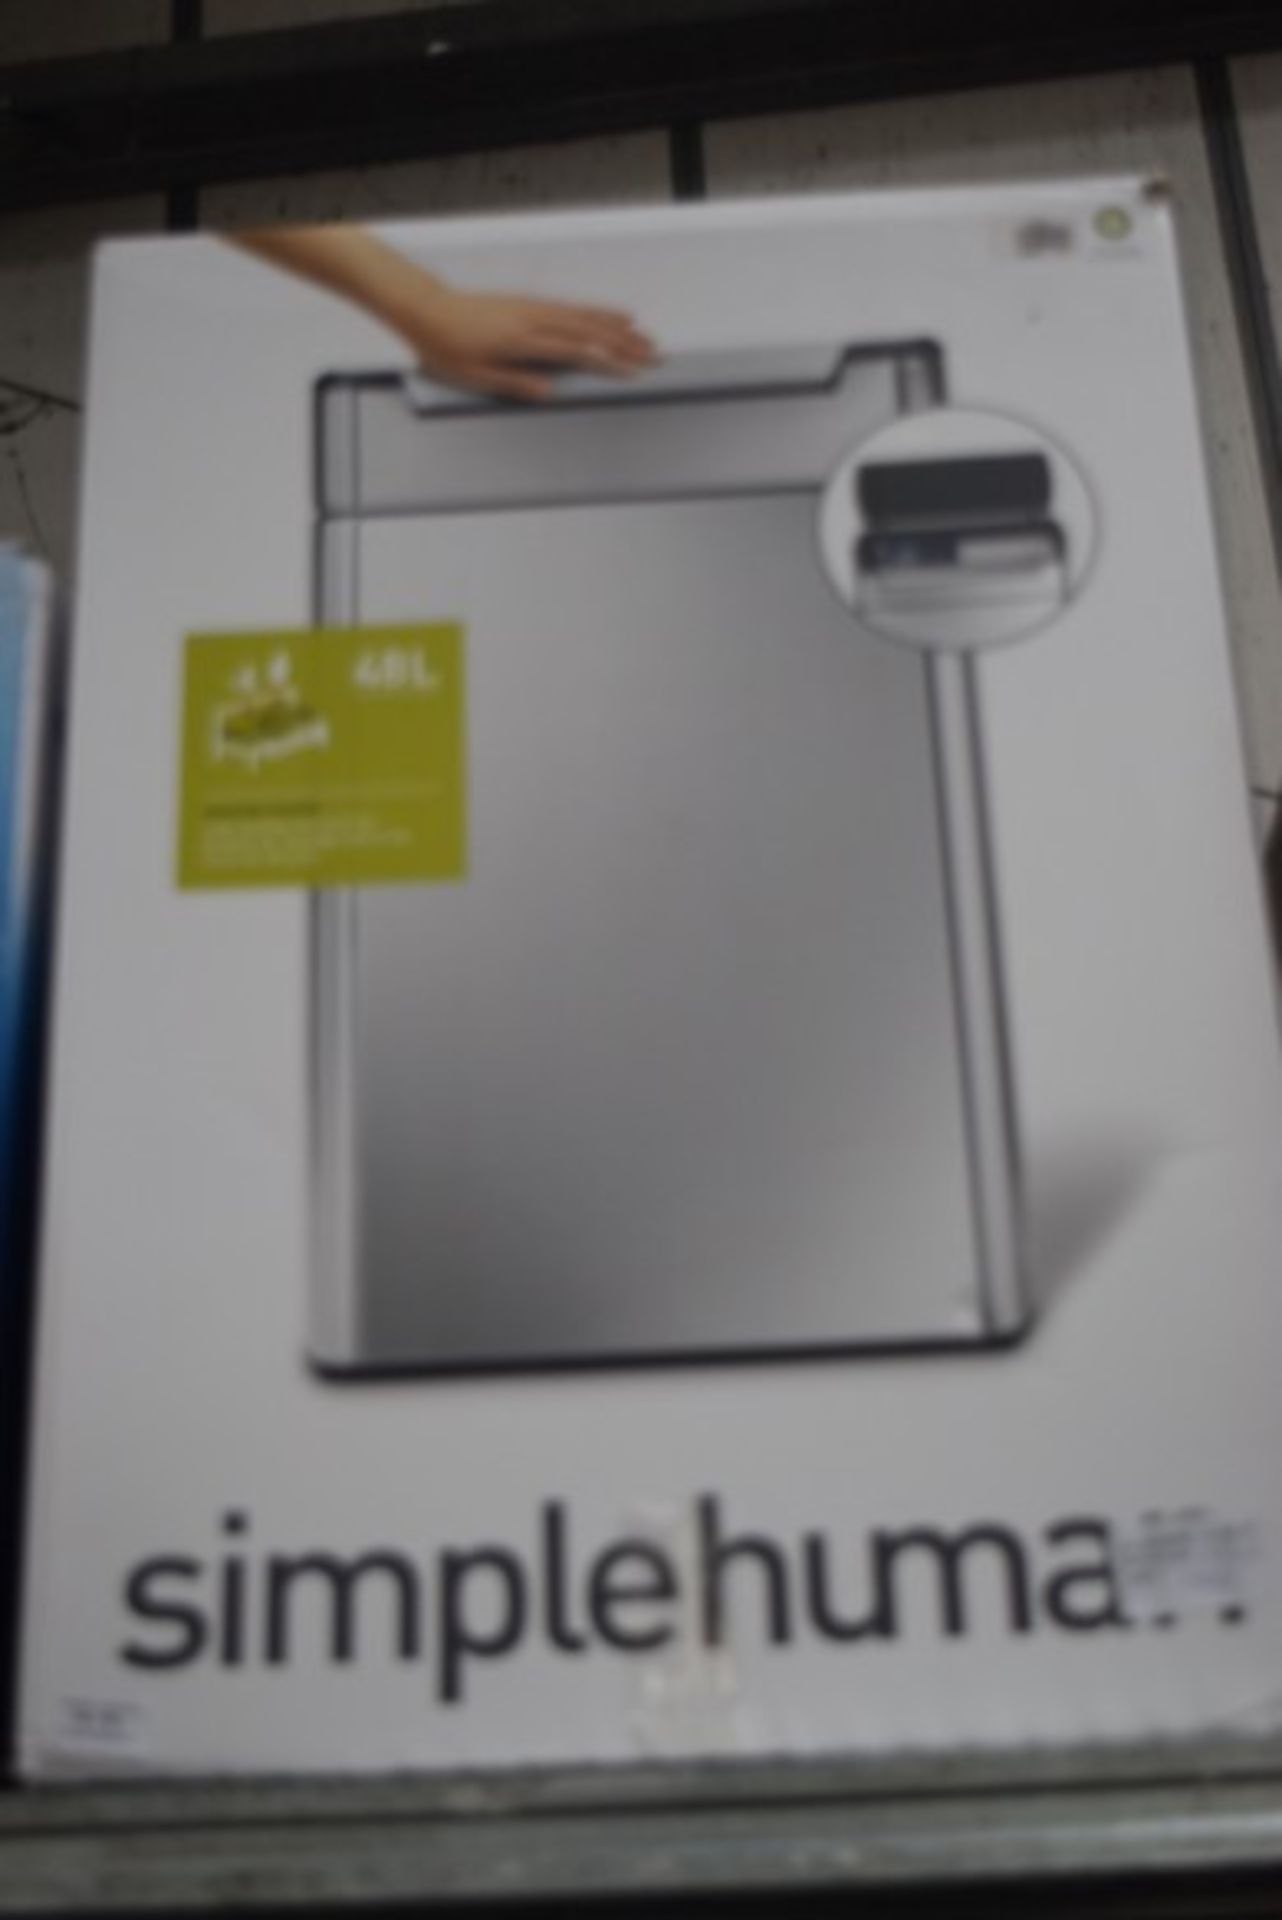 1 x BOXED SIMPLEHUMAN 48L TOUCH BAR RECYCLE BIN RRP £160 11.09.17 (3397153) *PLEASE NOTE THAT THE